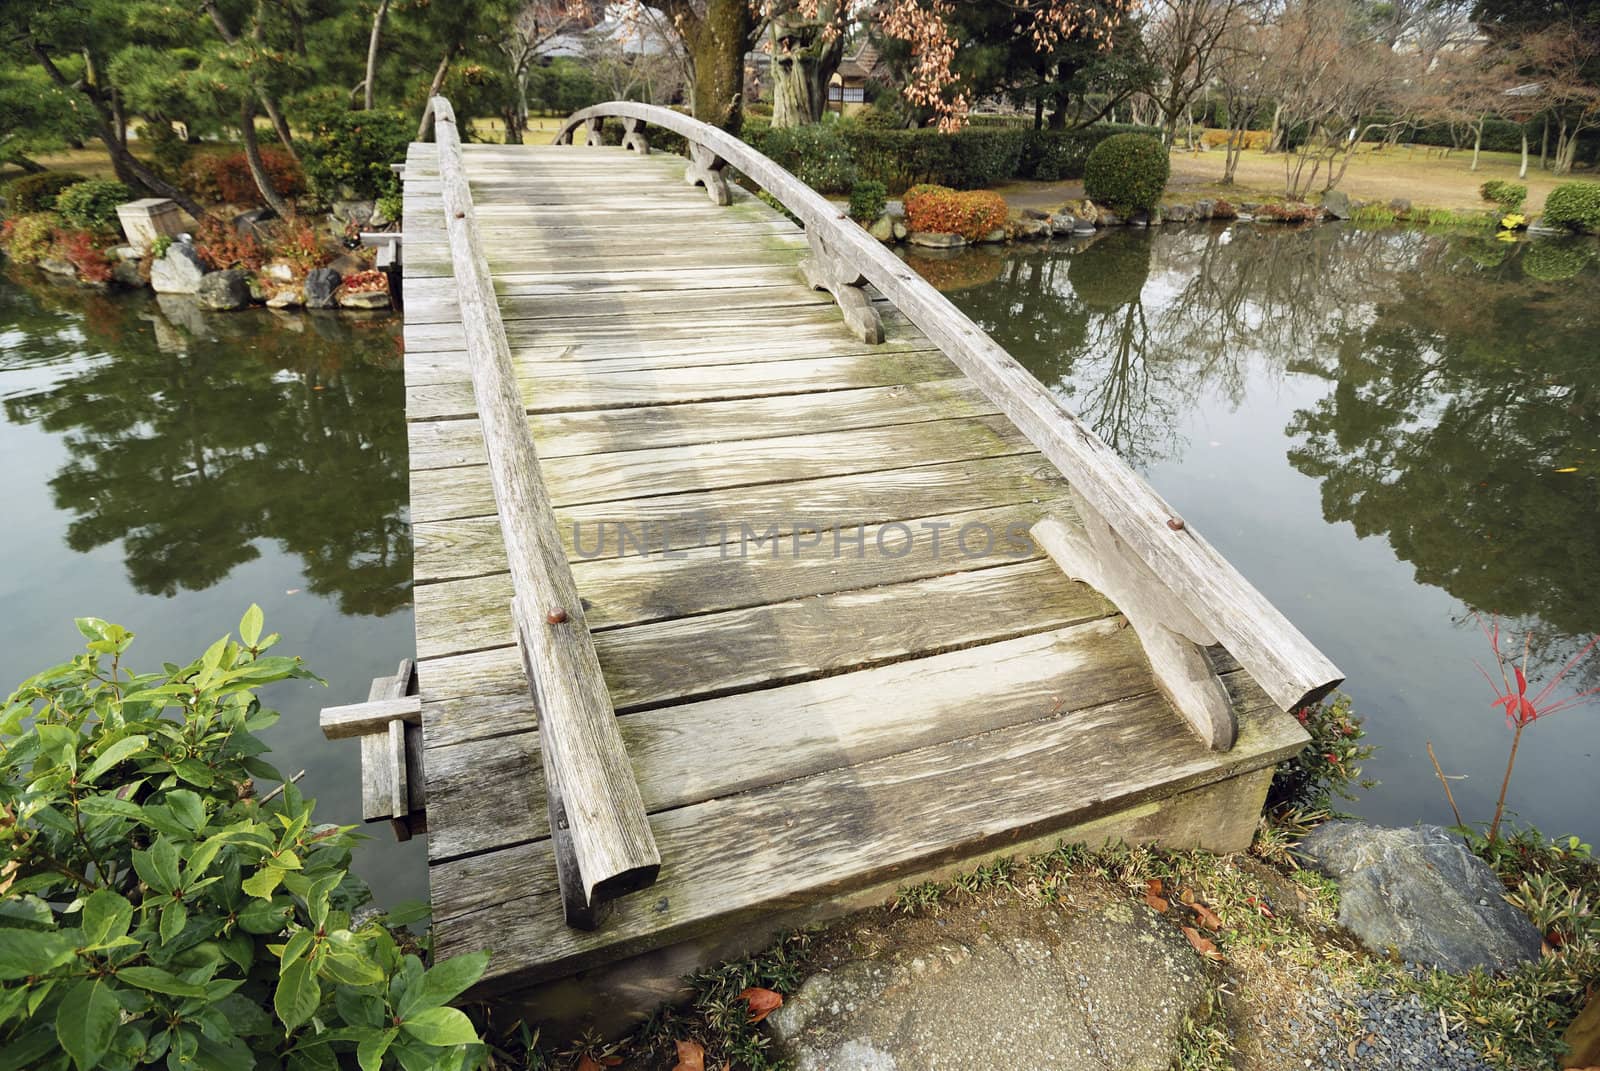  scenic wooden bridge in Japanese garden at early autumn; focus on front side